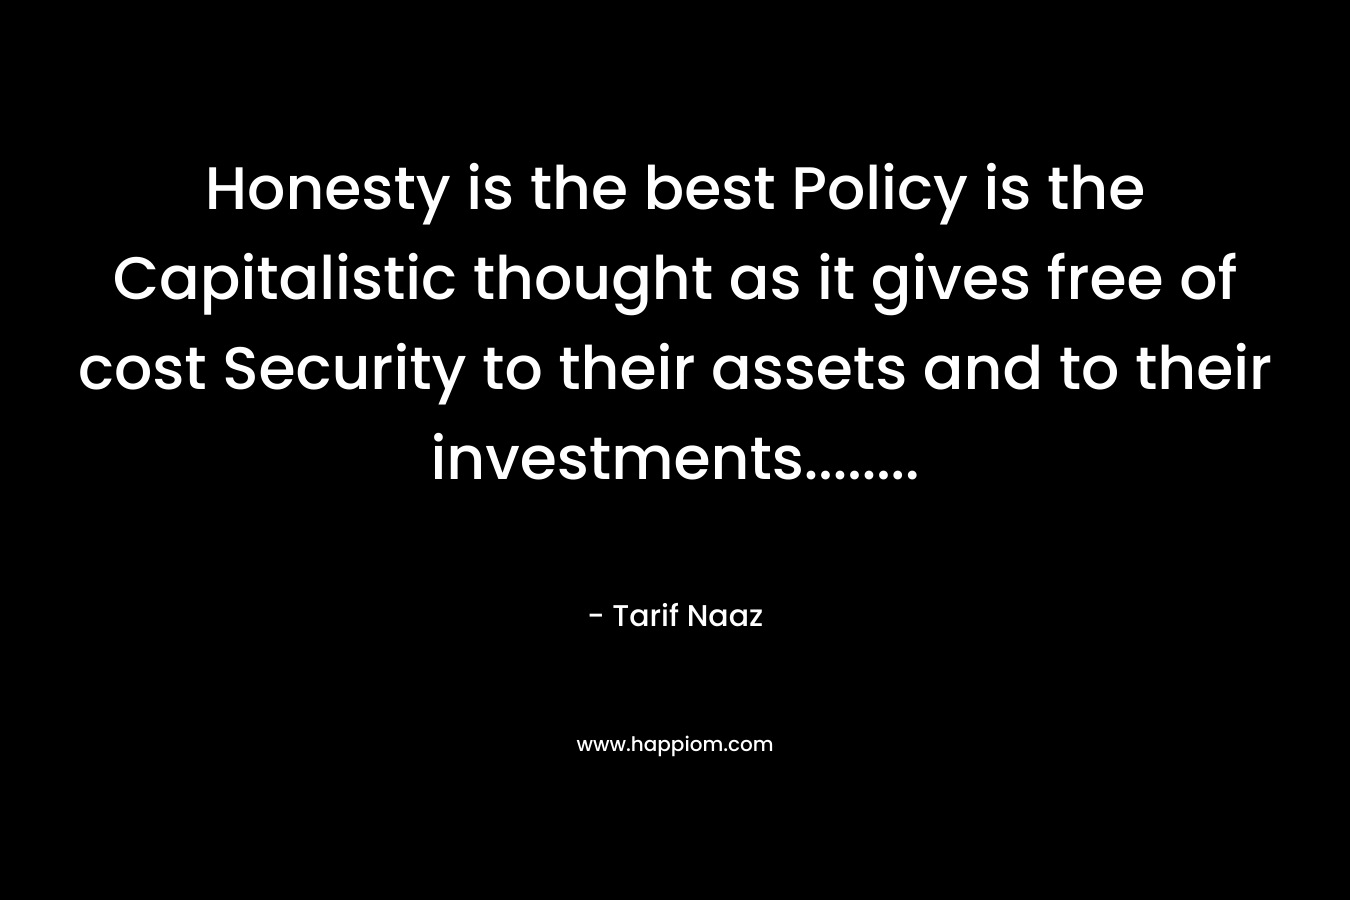 Honesty is the best Policy is the Capitalistic thought as it gives free of cost Security to their assets and to their investments…….. – Tarif Naaz